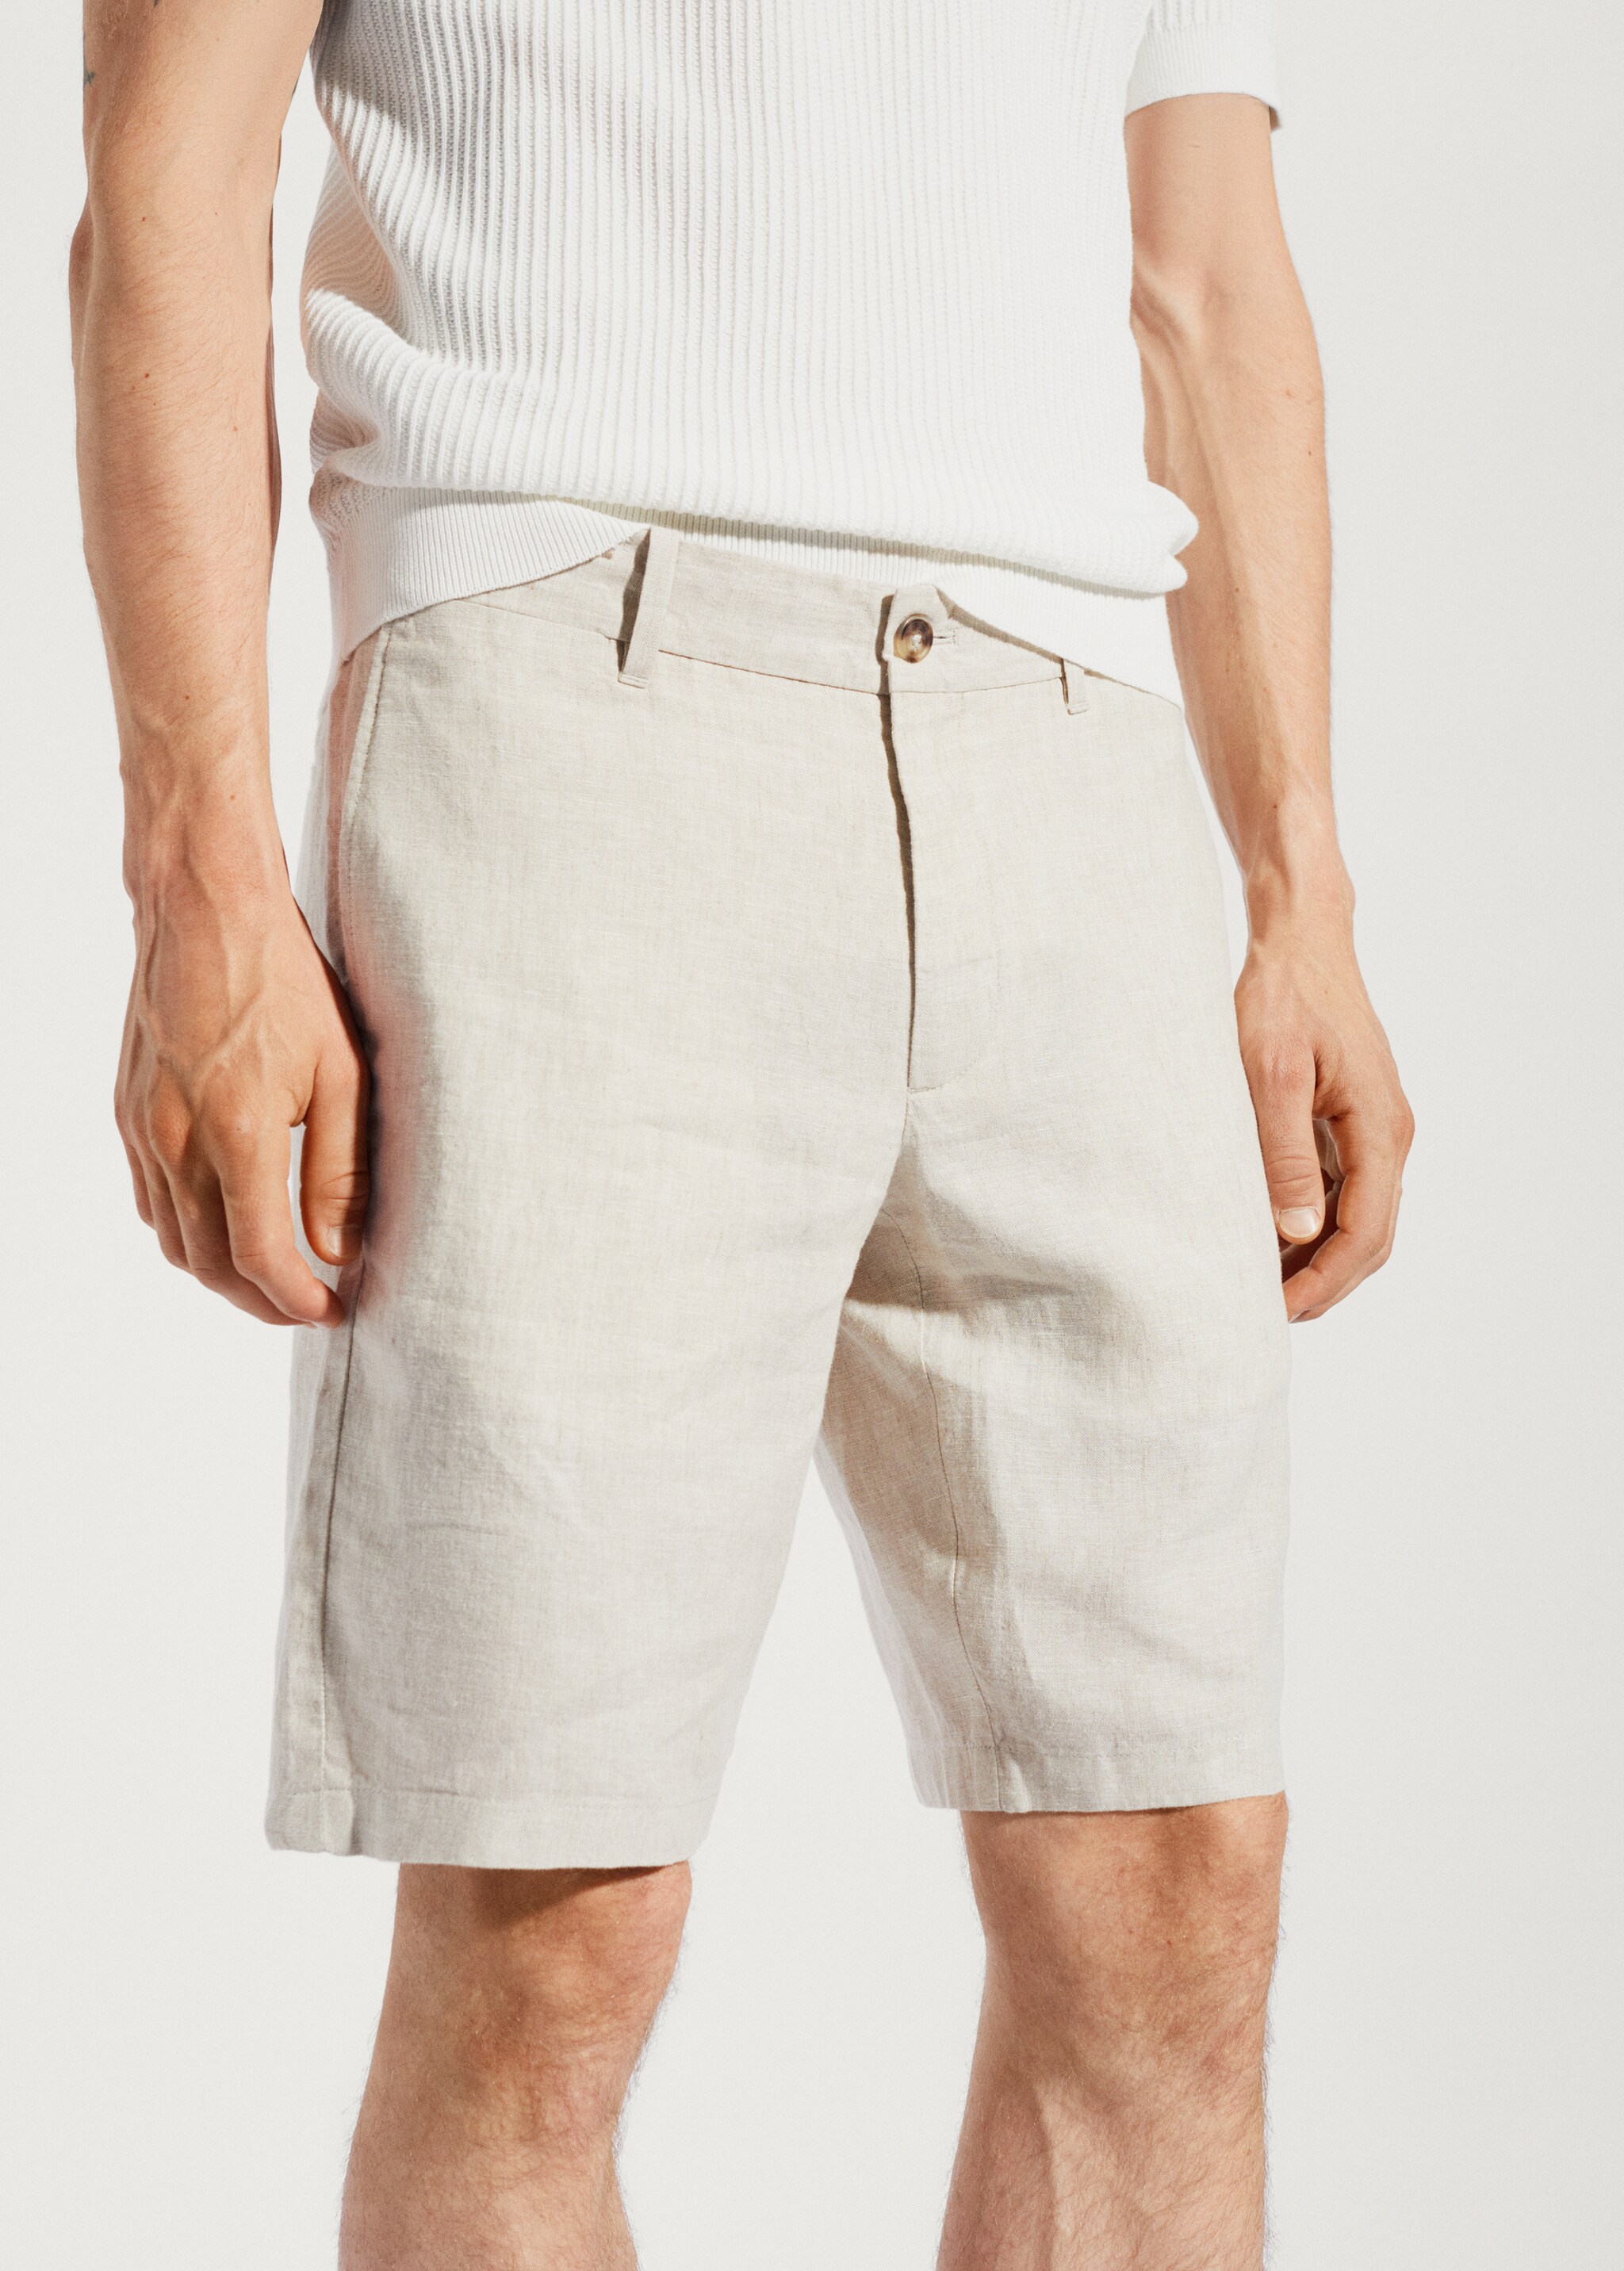 100% linen shorts - Details of the article 1